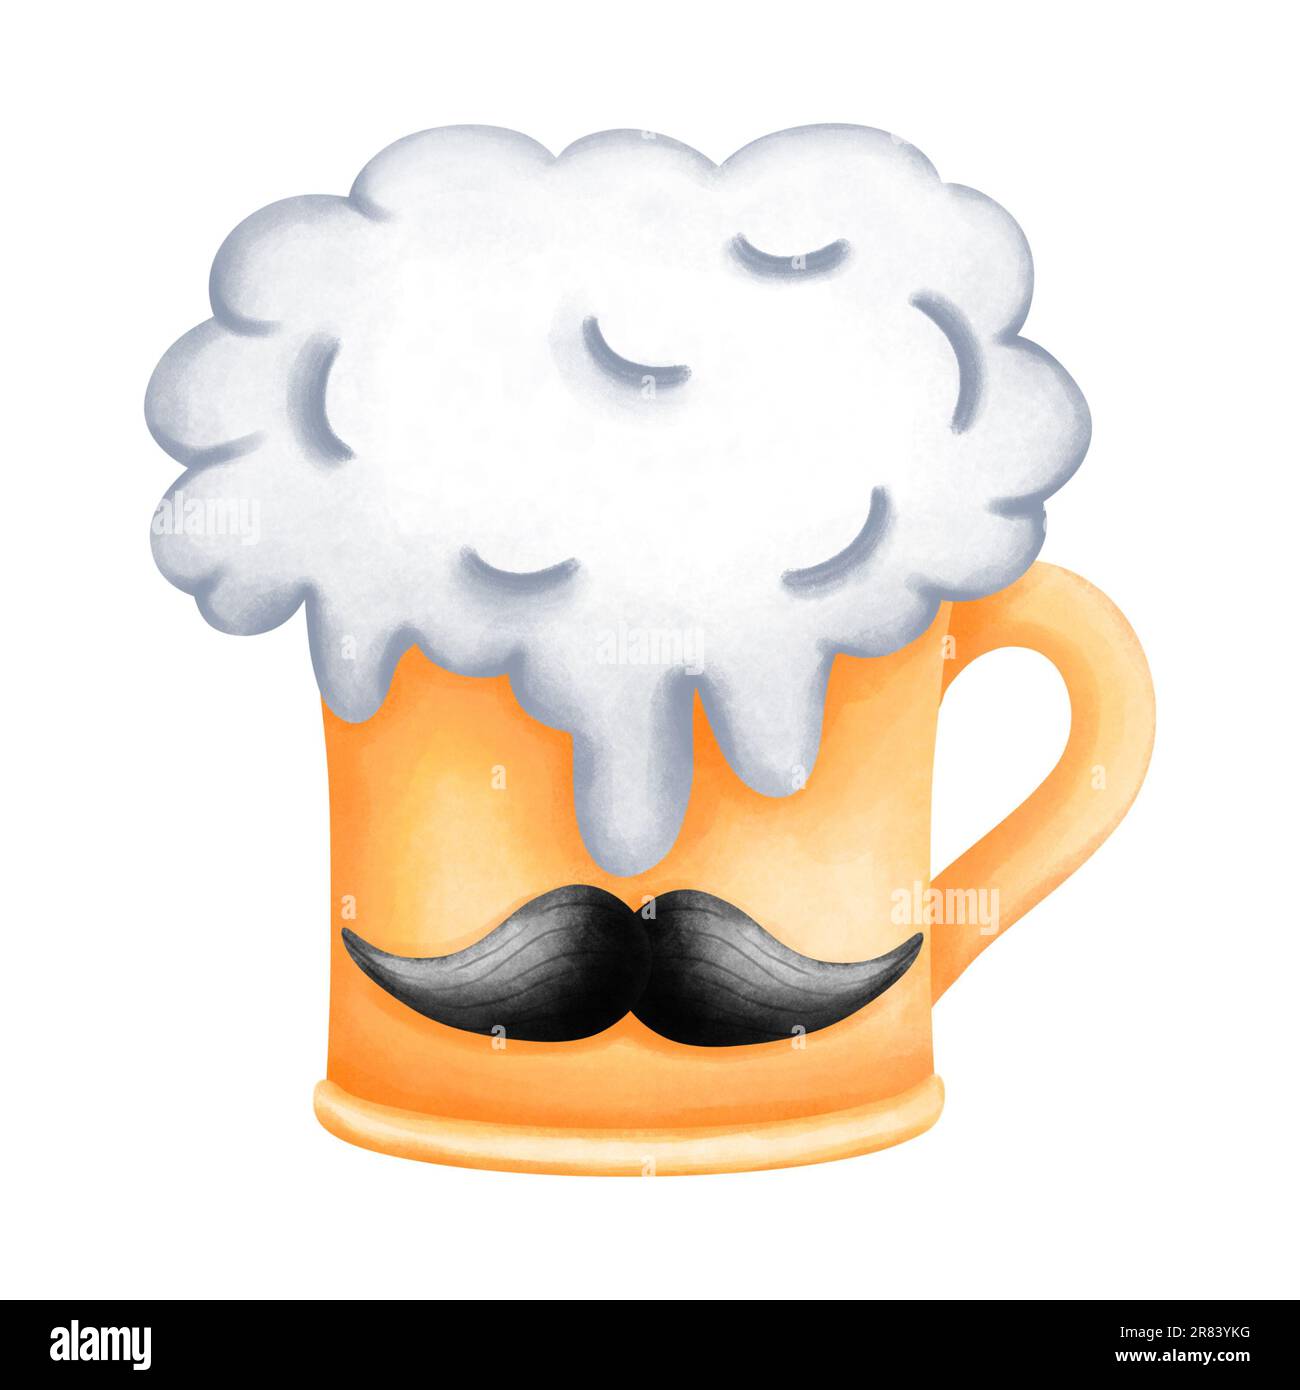 https://c8.alamy.com/comp/2R83YKG/watercolor-beer-glass-with-beard-illustration-isolated-on-white-background-fathers-day-element-clipartalcohol-party-drinkingbeverage-collection-2R83YKG.jpg